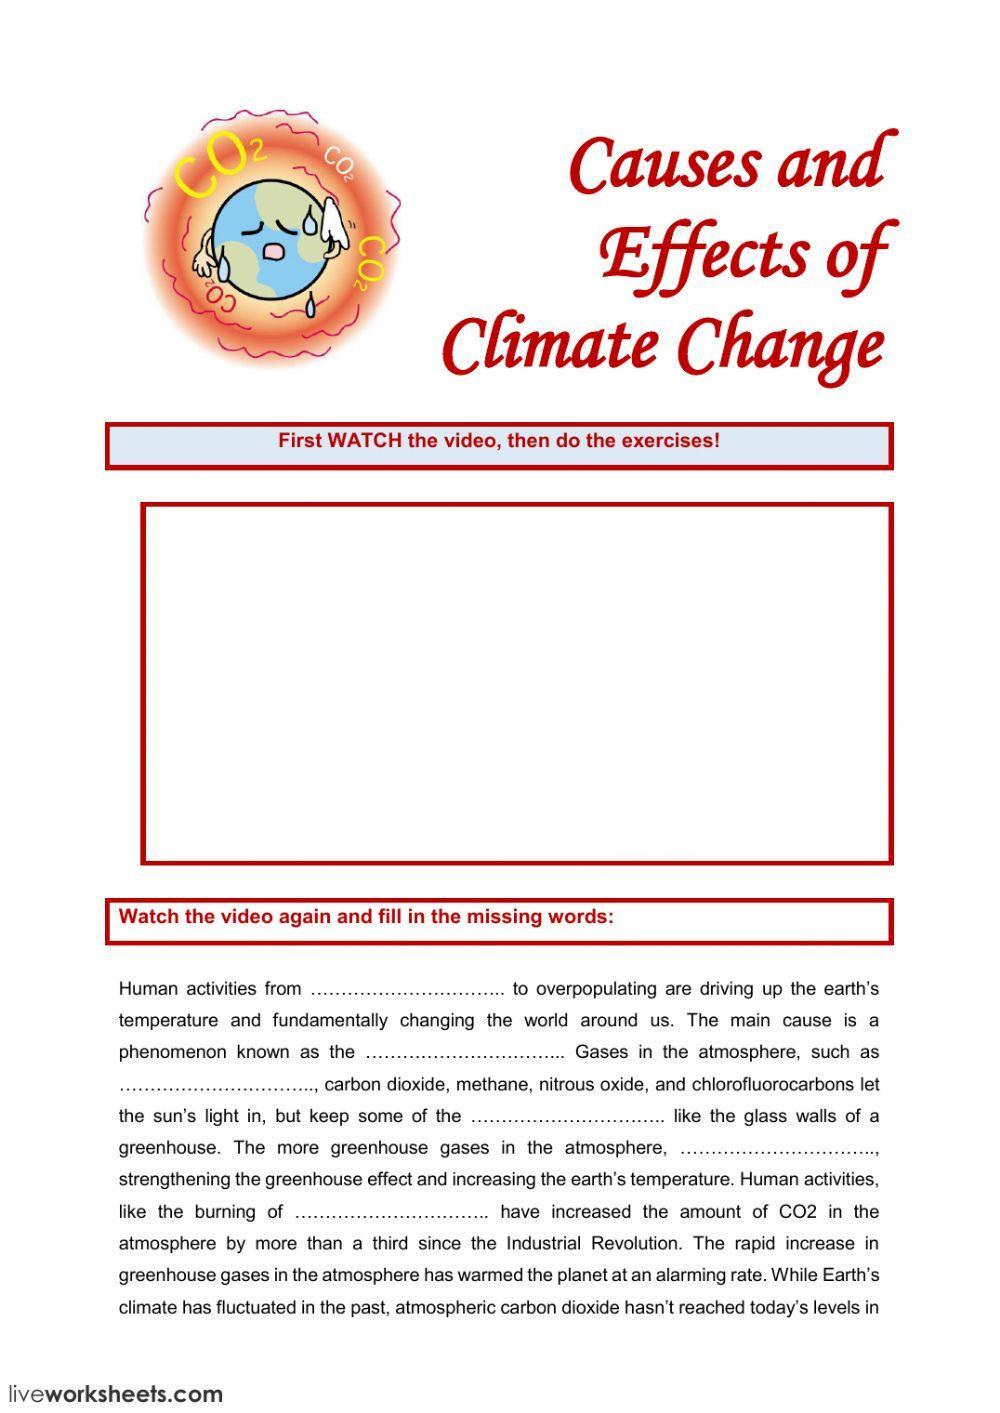 Causes and Effects of Climate Change